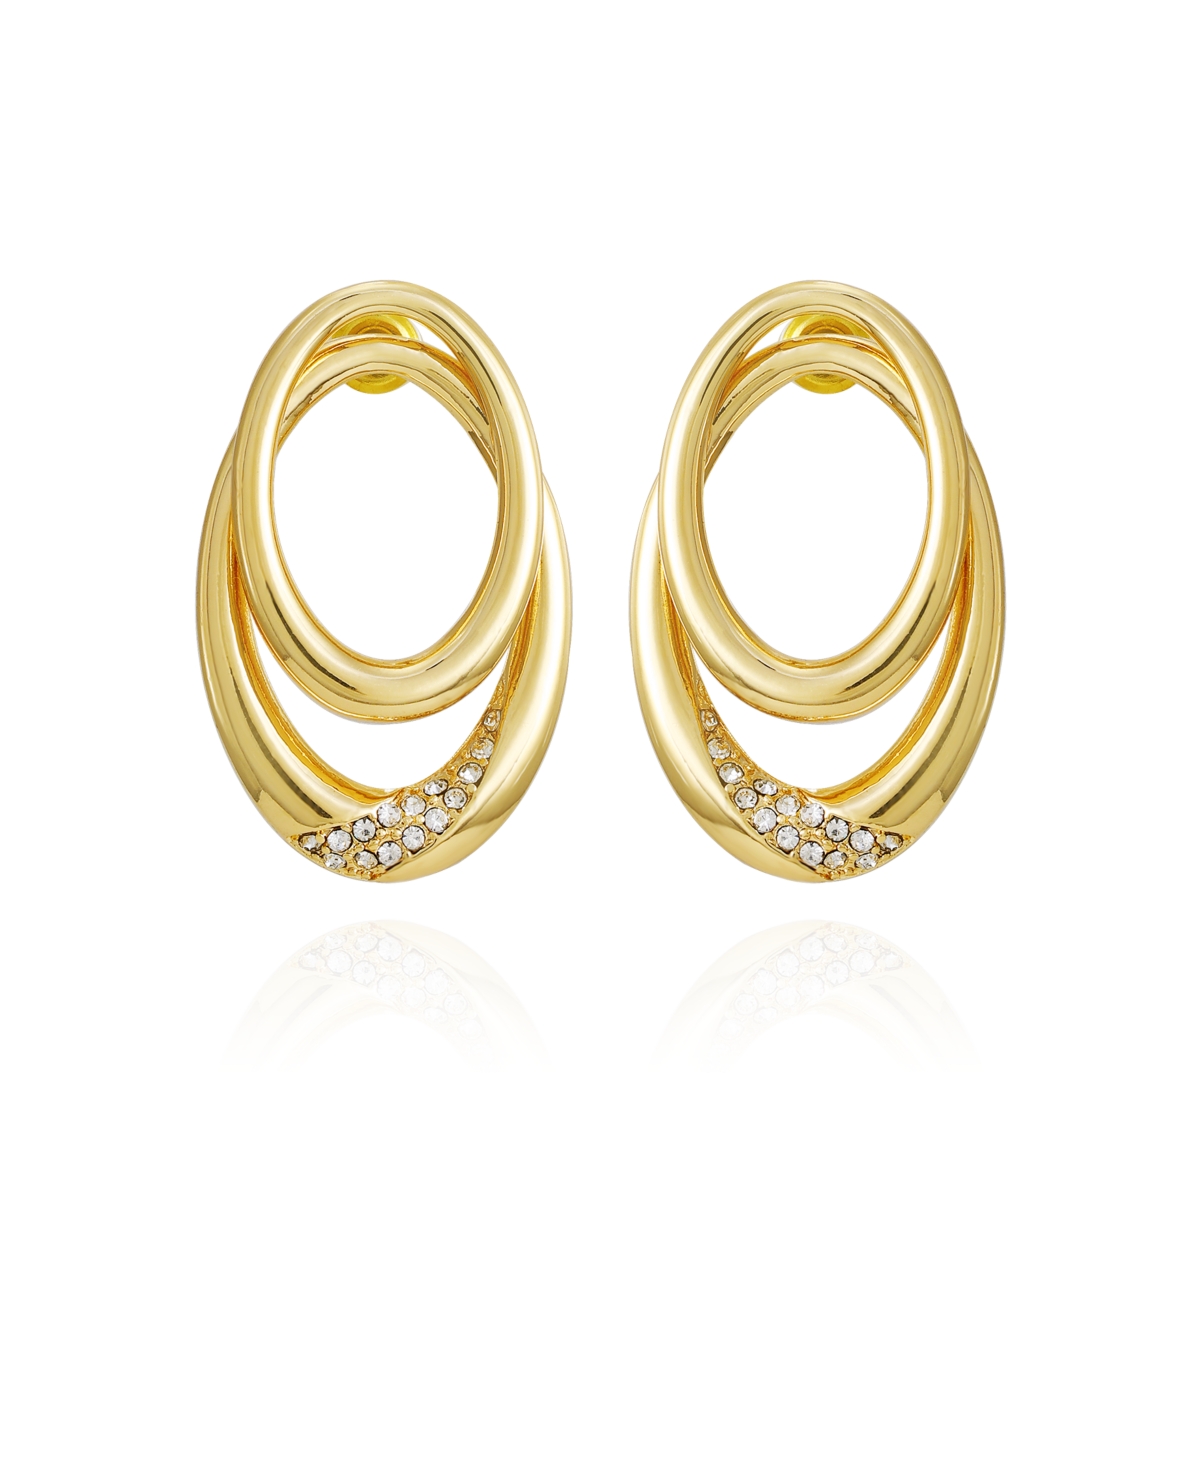 Vince Camuto Gold-tone Glass Stone Double Hoop Earrings